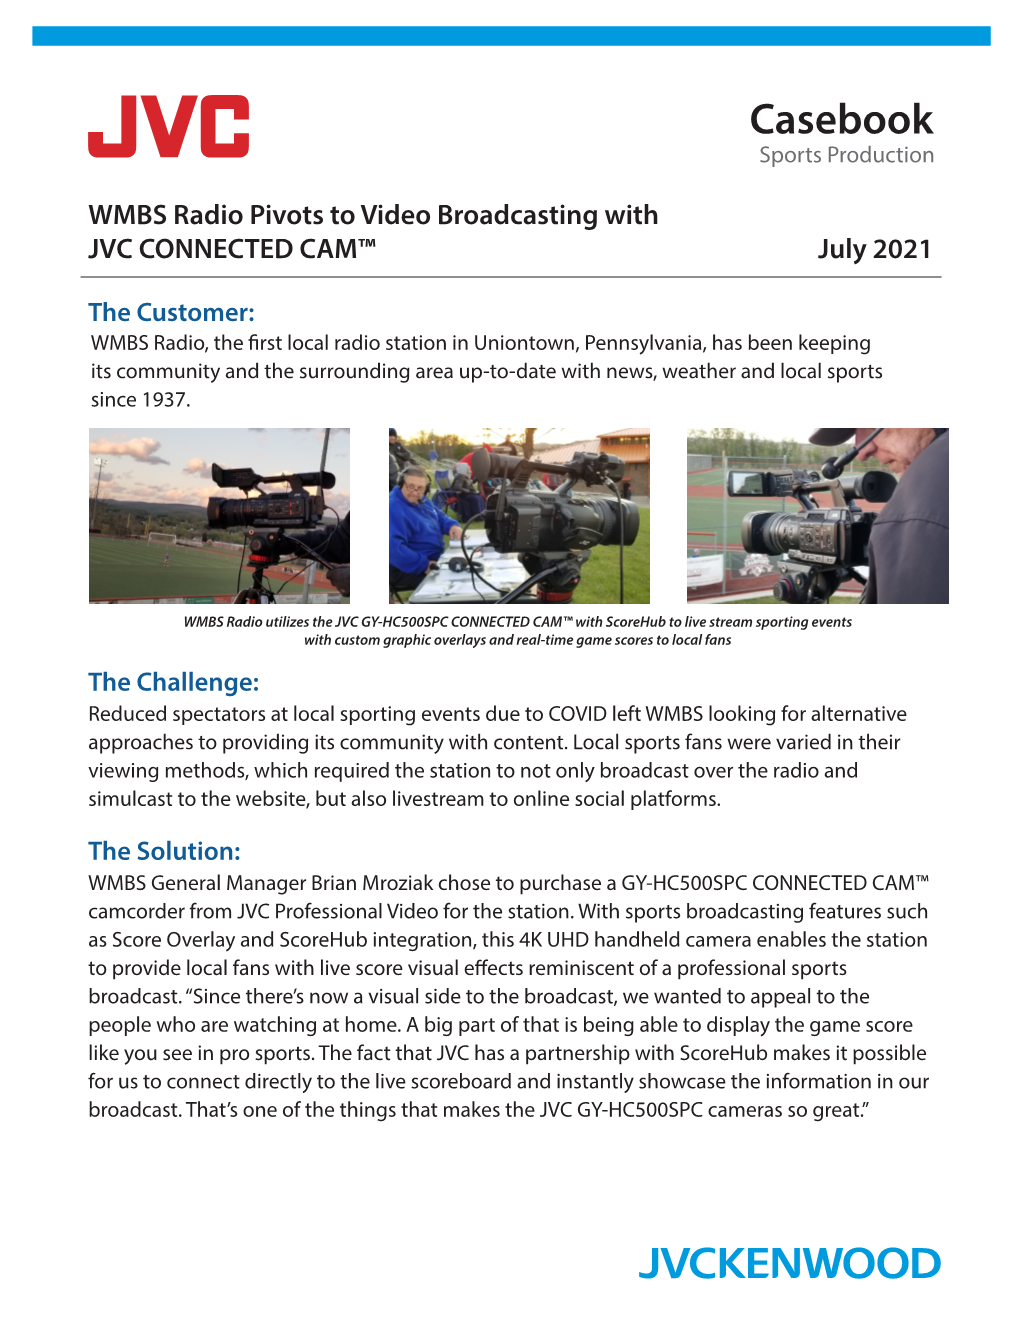 WMBS Radio Pivots to Video Broadcasting with JVC CONNECTED CAM™ July 2021